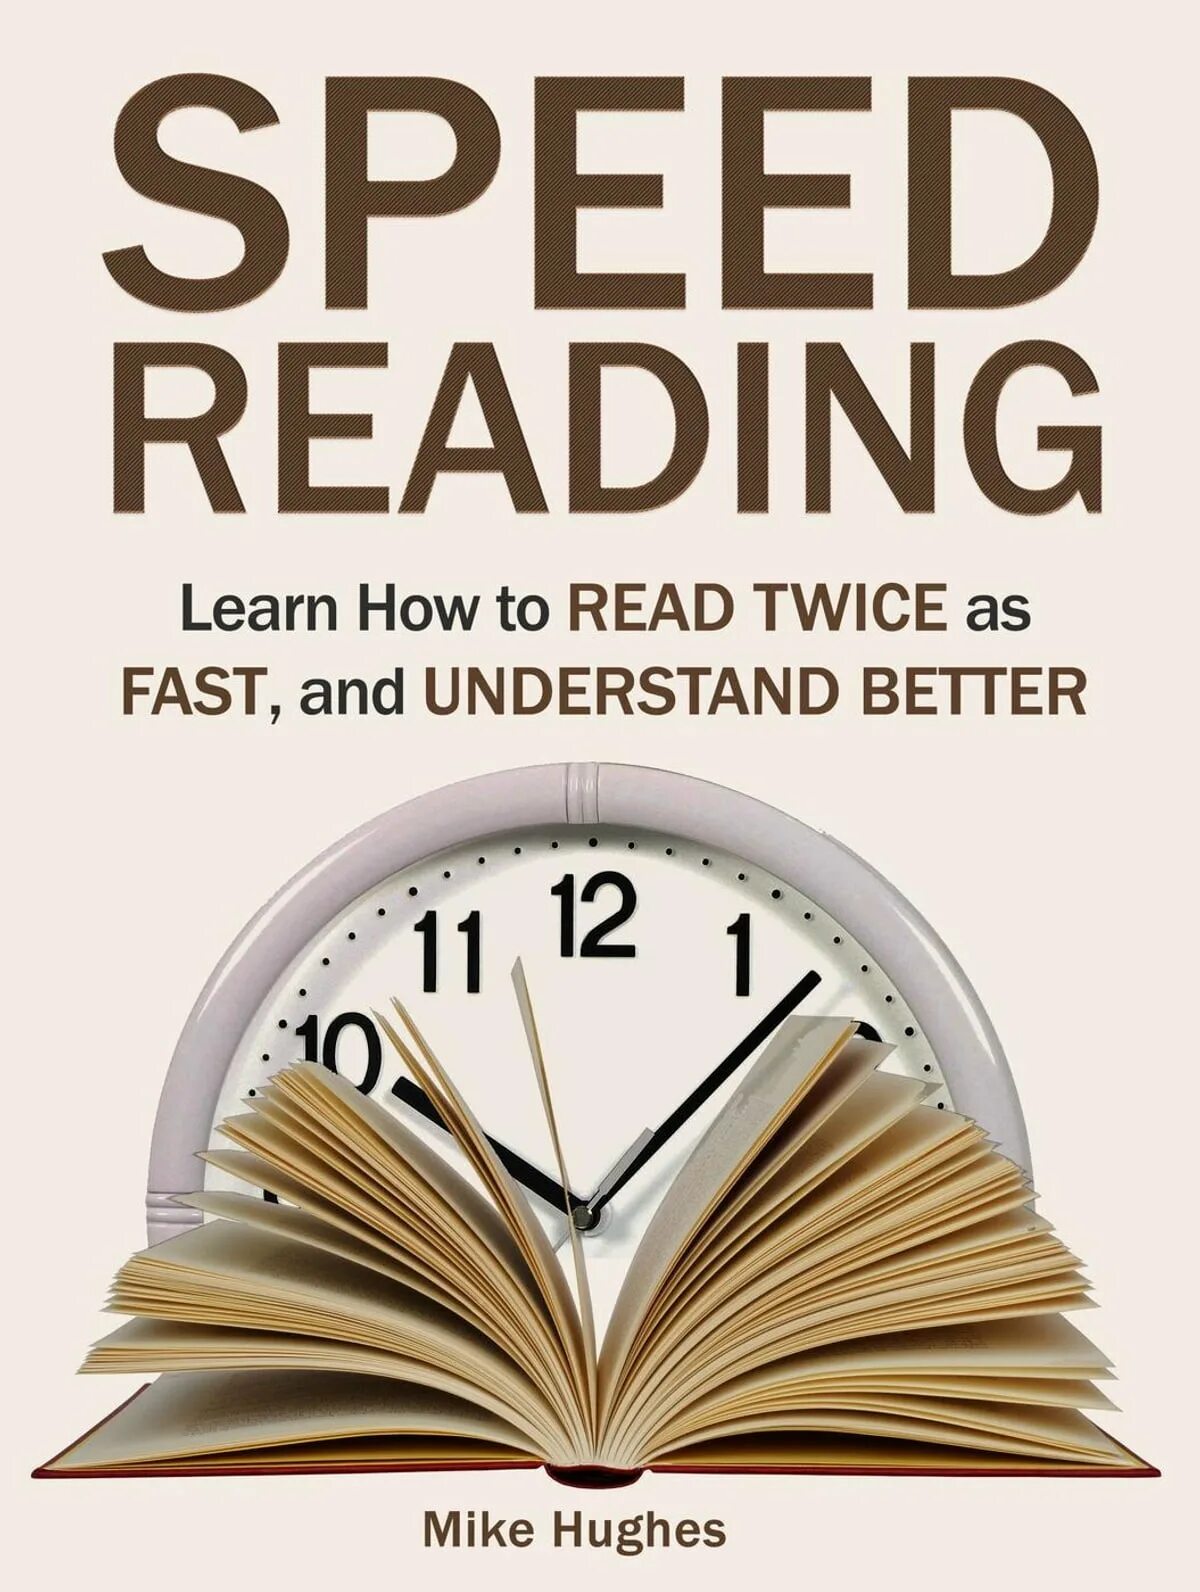 How to read better. Speed reading. Read and understand book. Reading faster. Learn how to read.